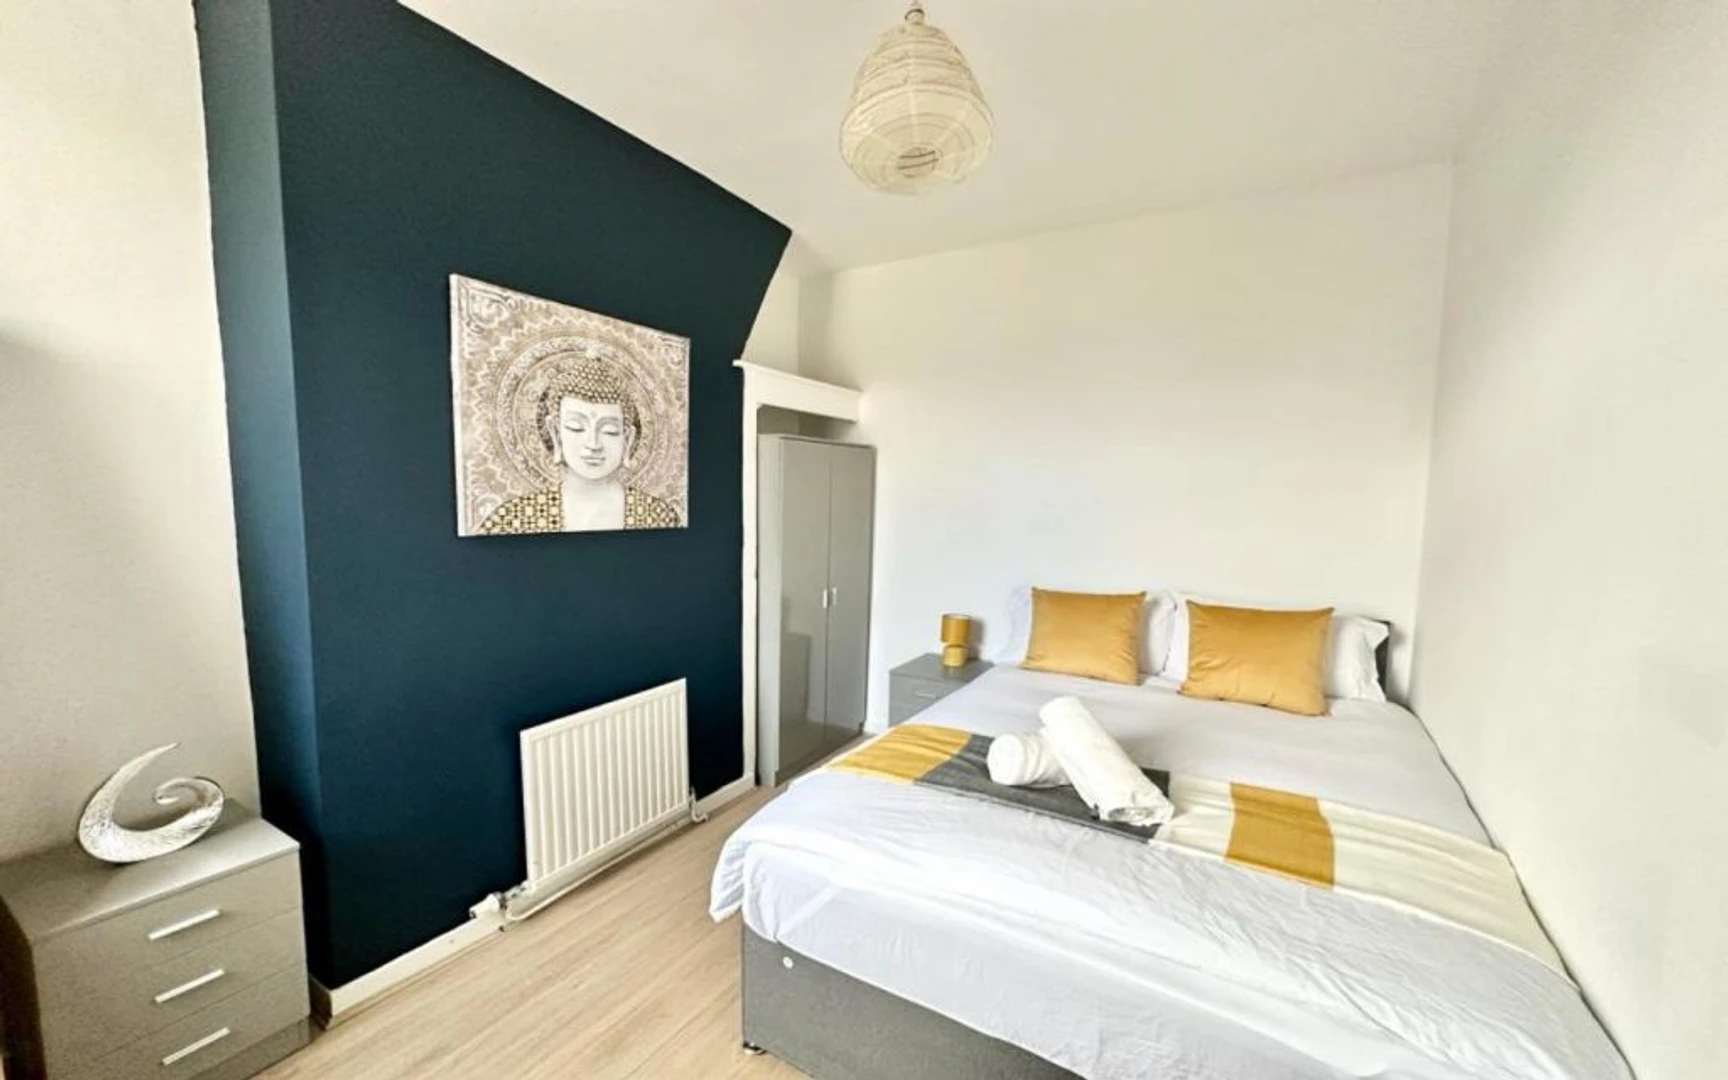 Accommodation in the centre of Liverpool